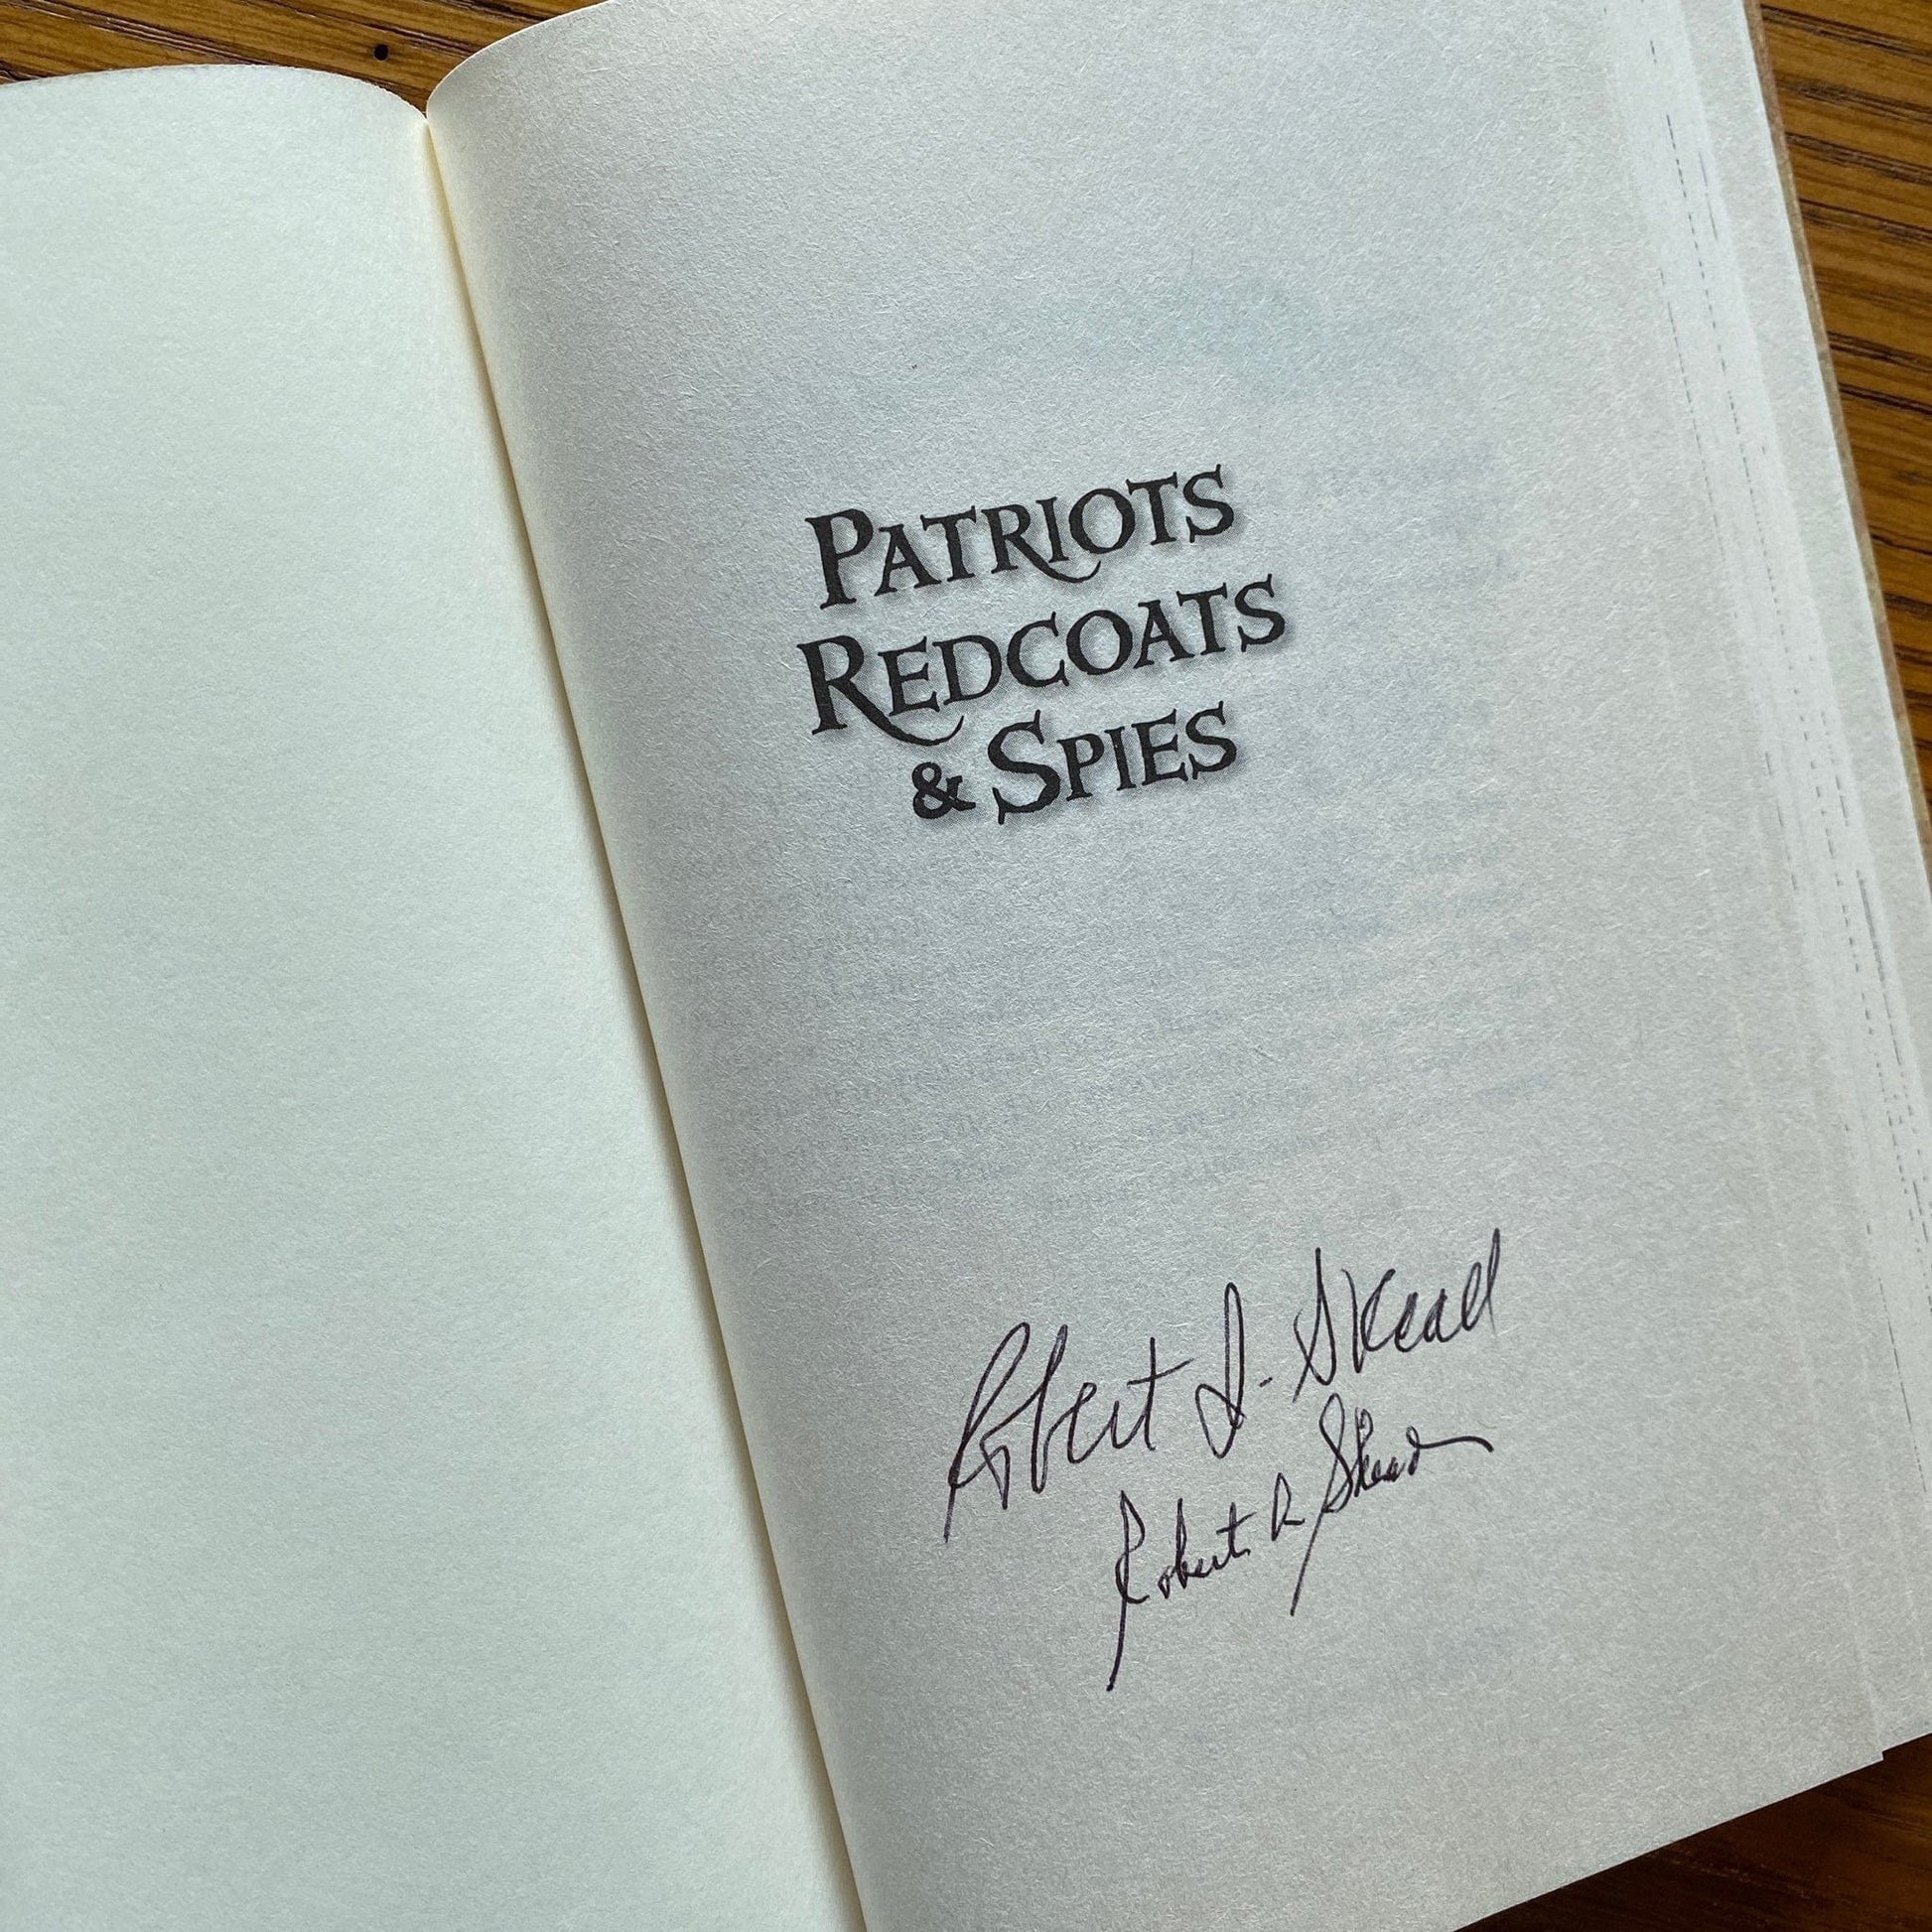 "Patriots, Redcoats & Spies" - Signed by the Authors, Robert J. Skead and Robert A. Skead from The History List Store